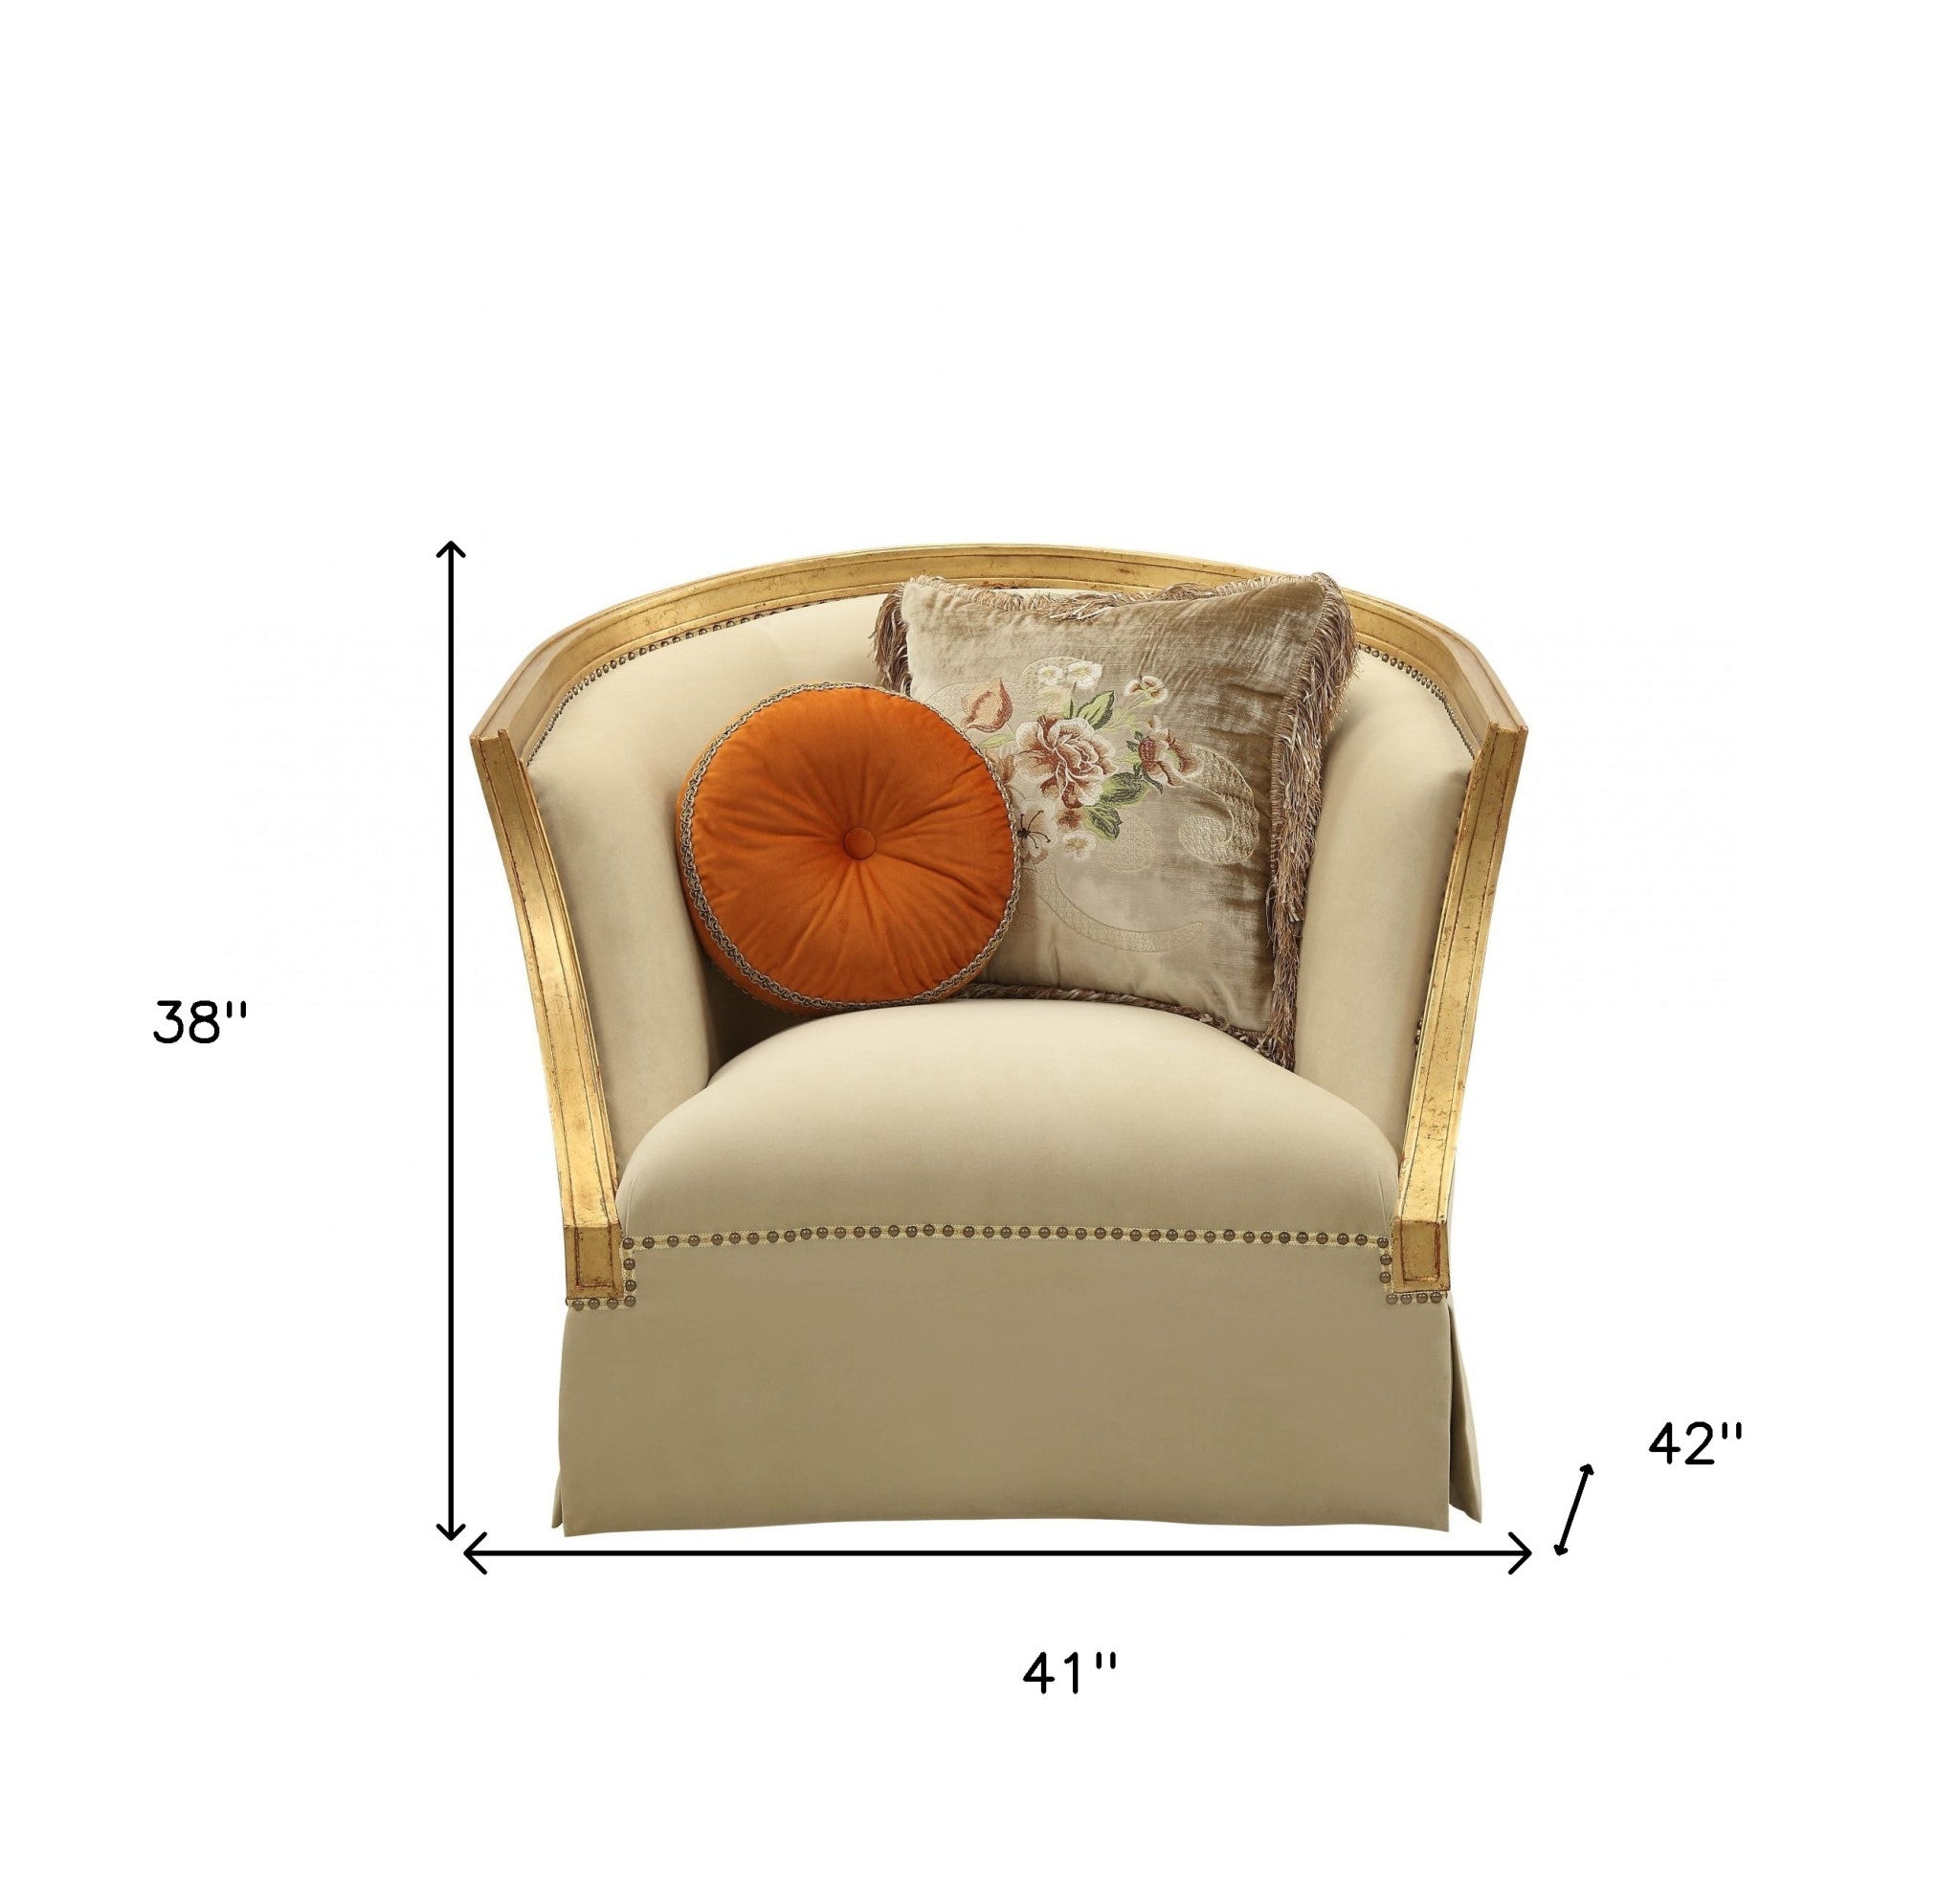 41" Tan and Gold Distressed Arm Chair and Toss Pillows